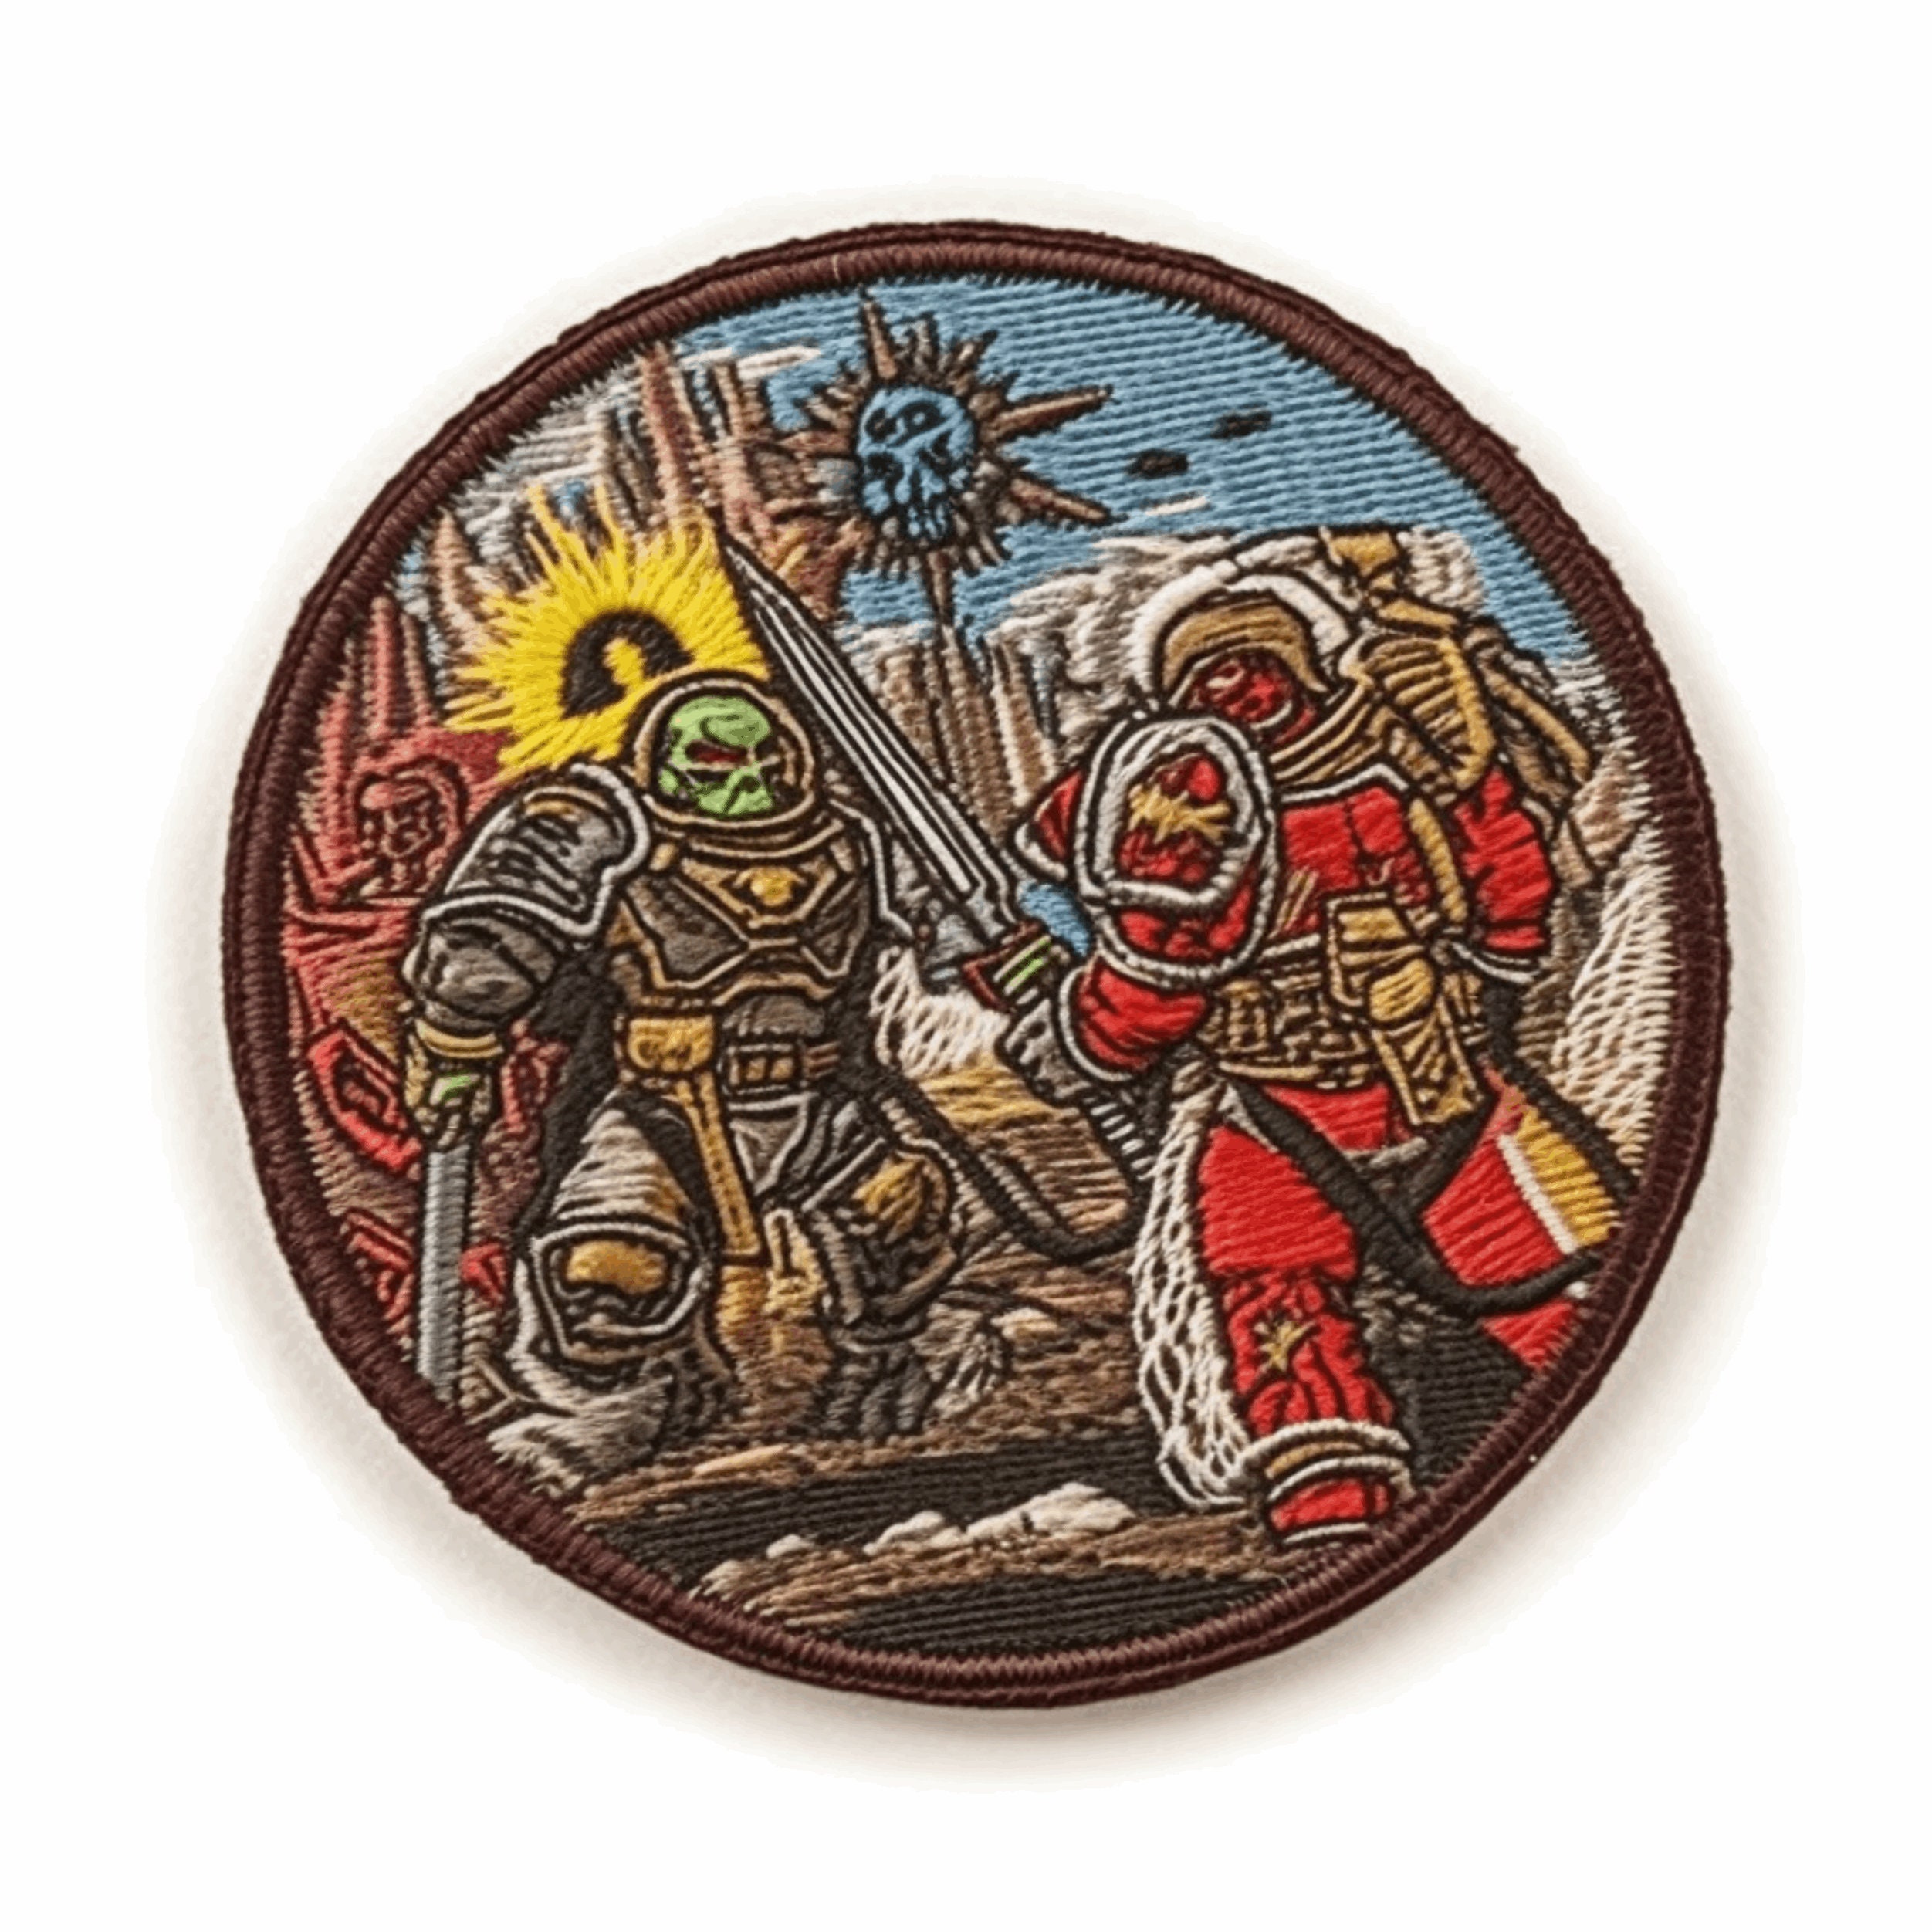 Got some Iron Hands velcro patches made : r/Warhammer40k